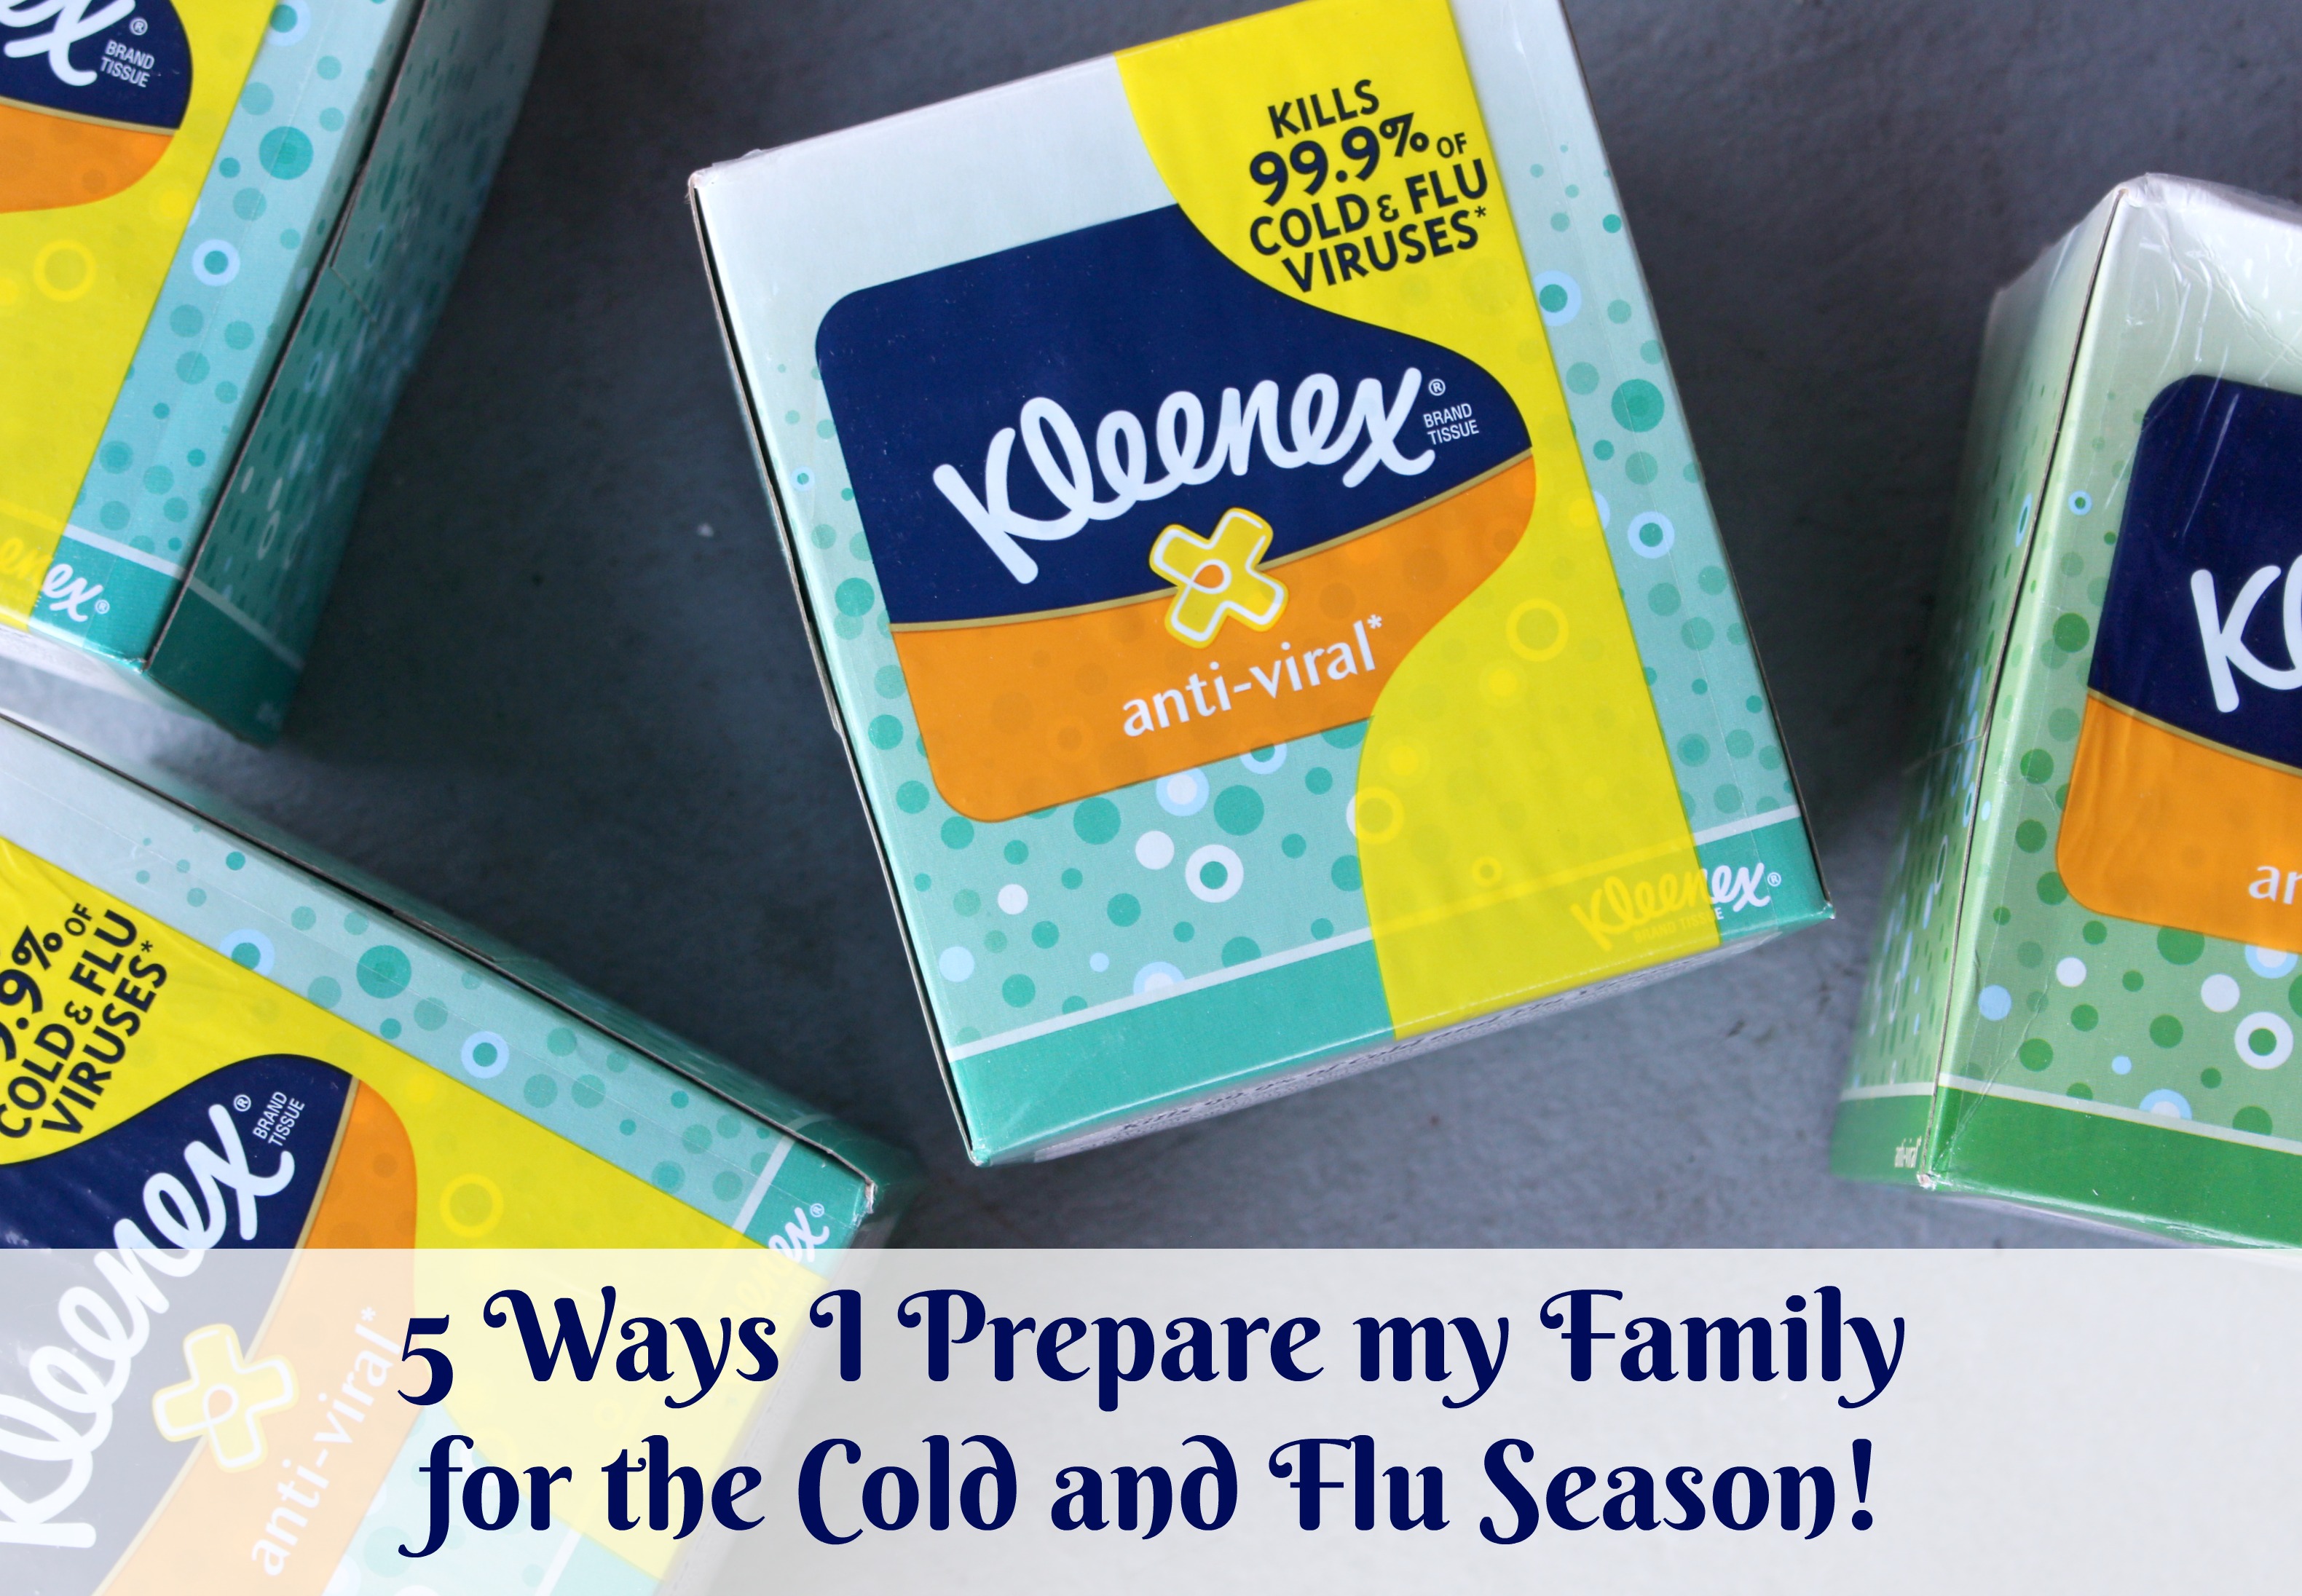 How My Family Prepares for the Cold and Flu Season!